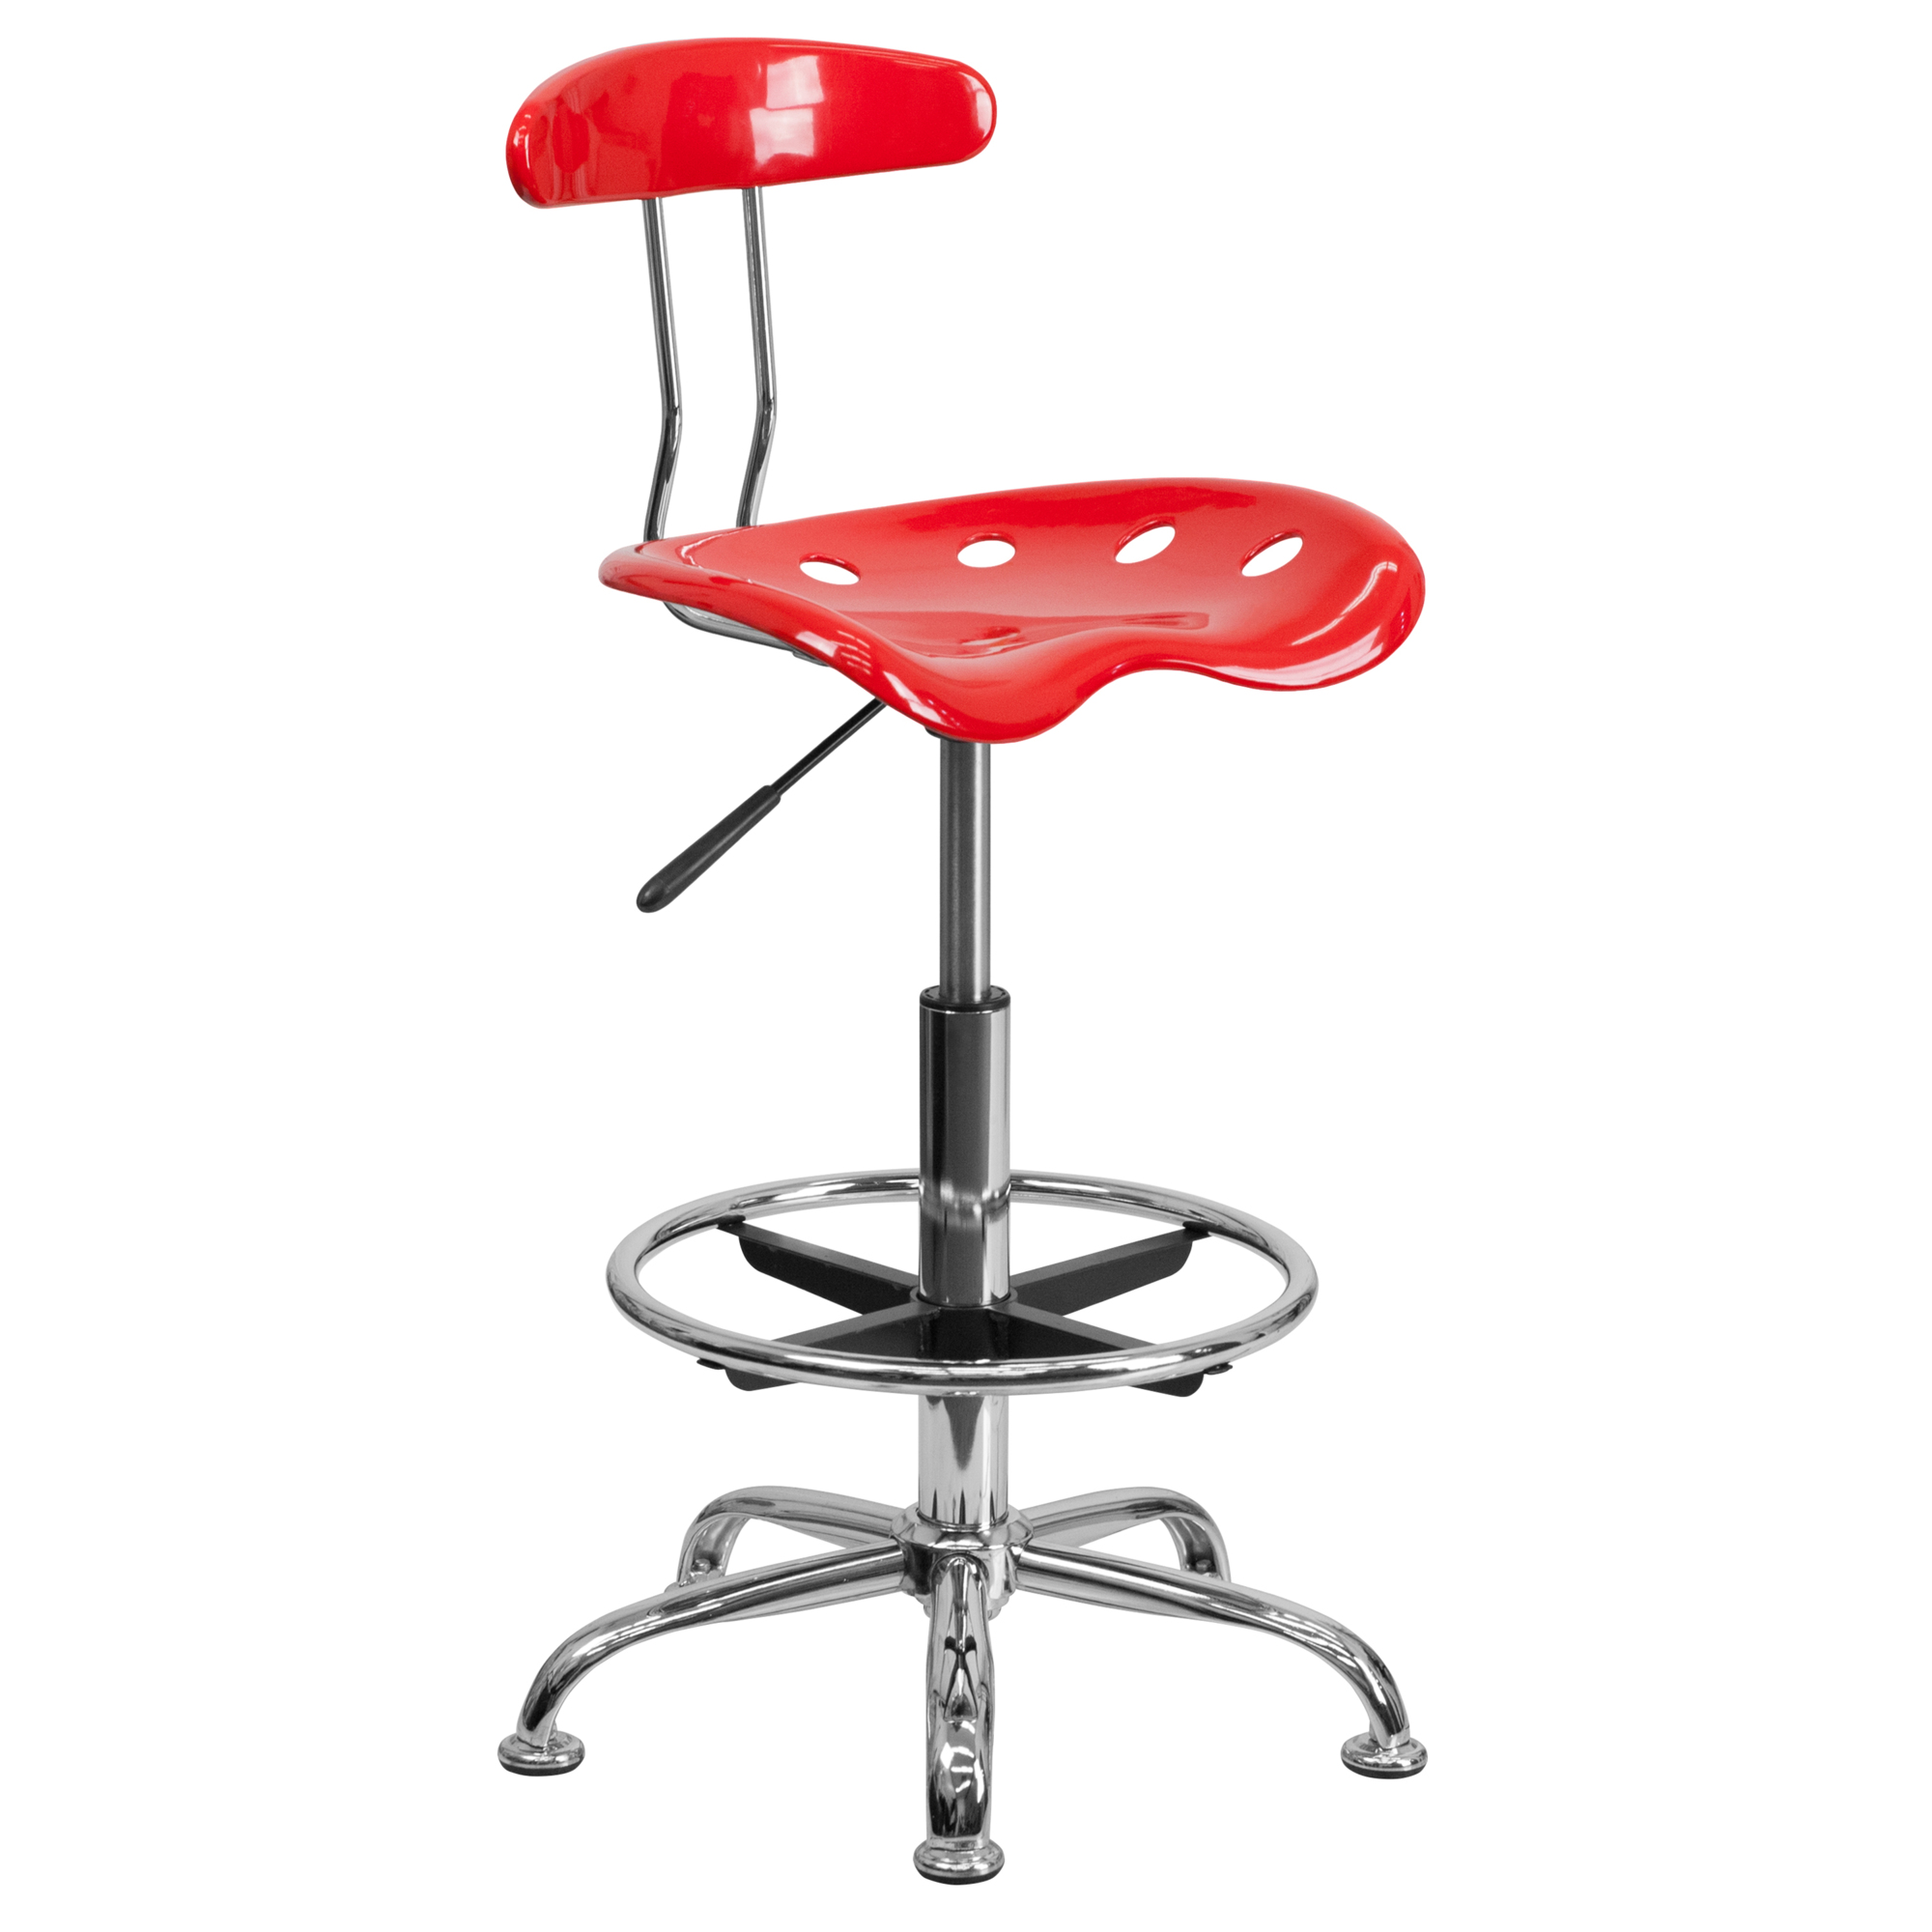 Flash Furniture, Vibrant Red and Chrome Drafting Stool, Primary Color Red, Included (qty.) 1, Model LF215RED